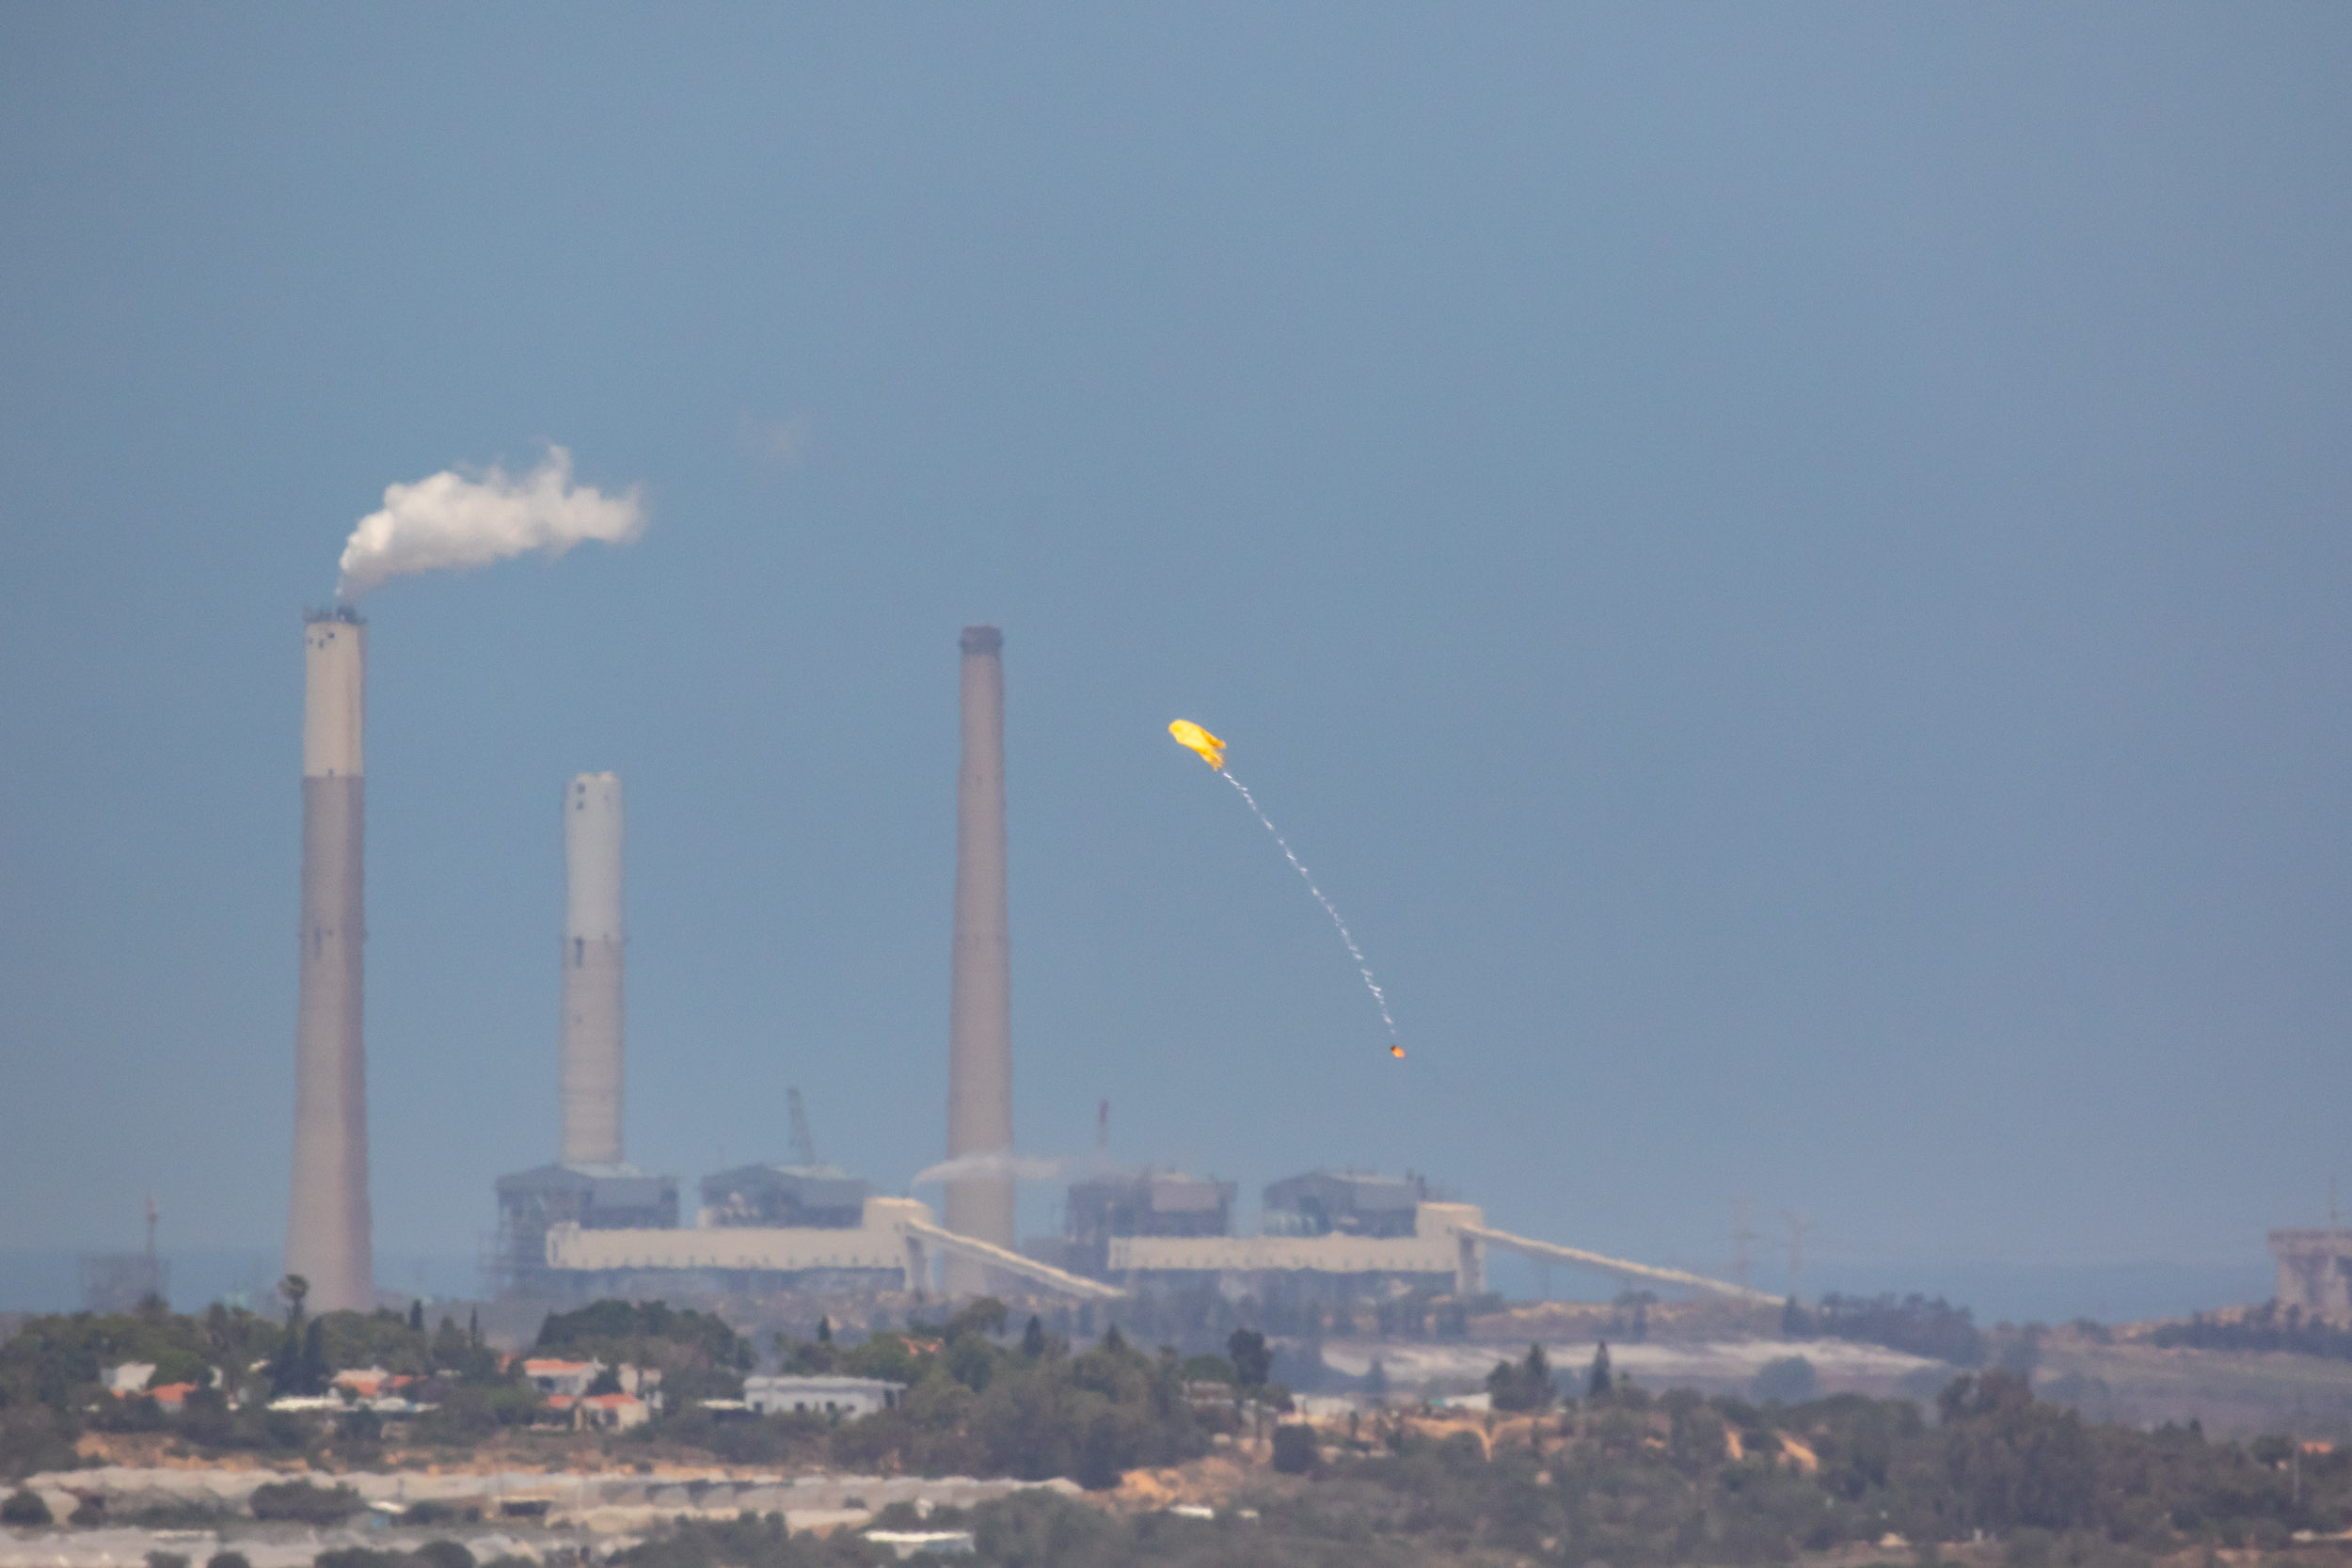 Northern Gaza Border, May 2018 - Kite with Molotov released to setup fires in Israeli fields